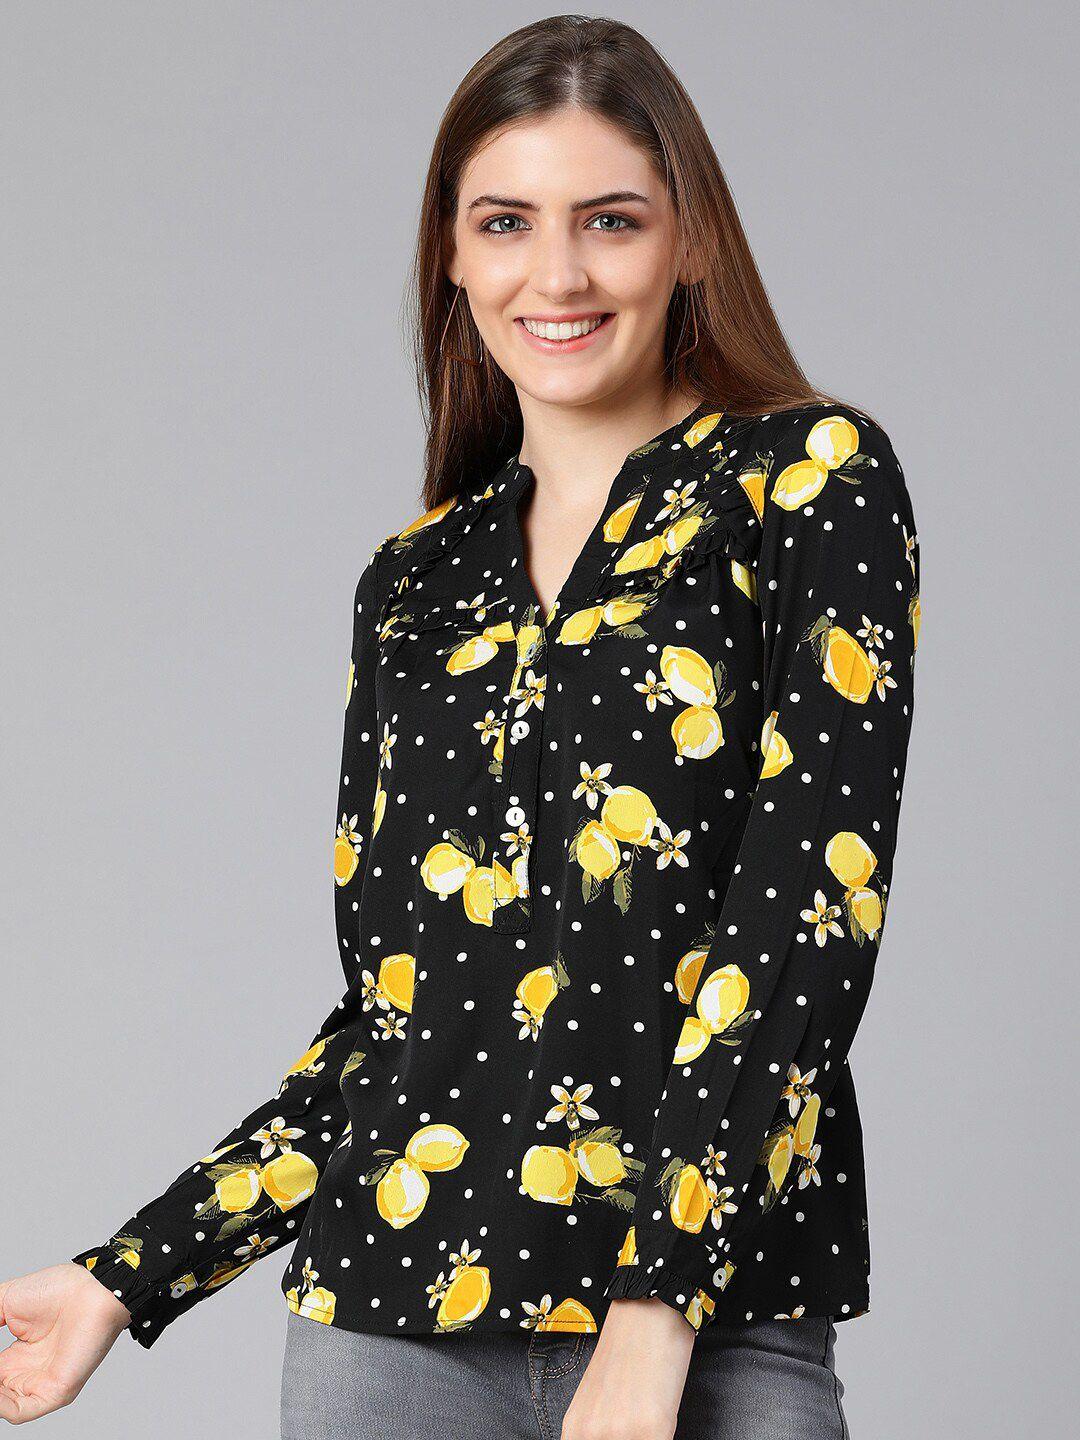 oxolloxo women black & yellow floral printed top